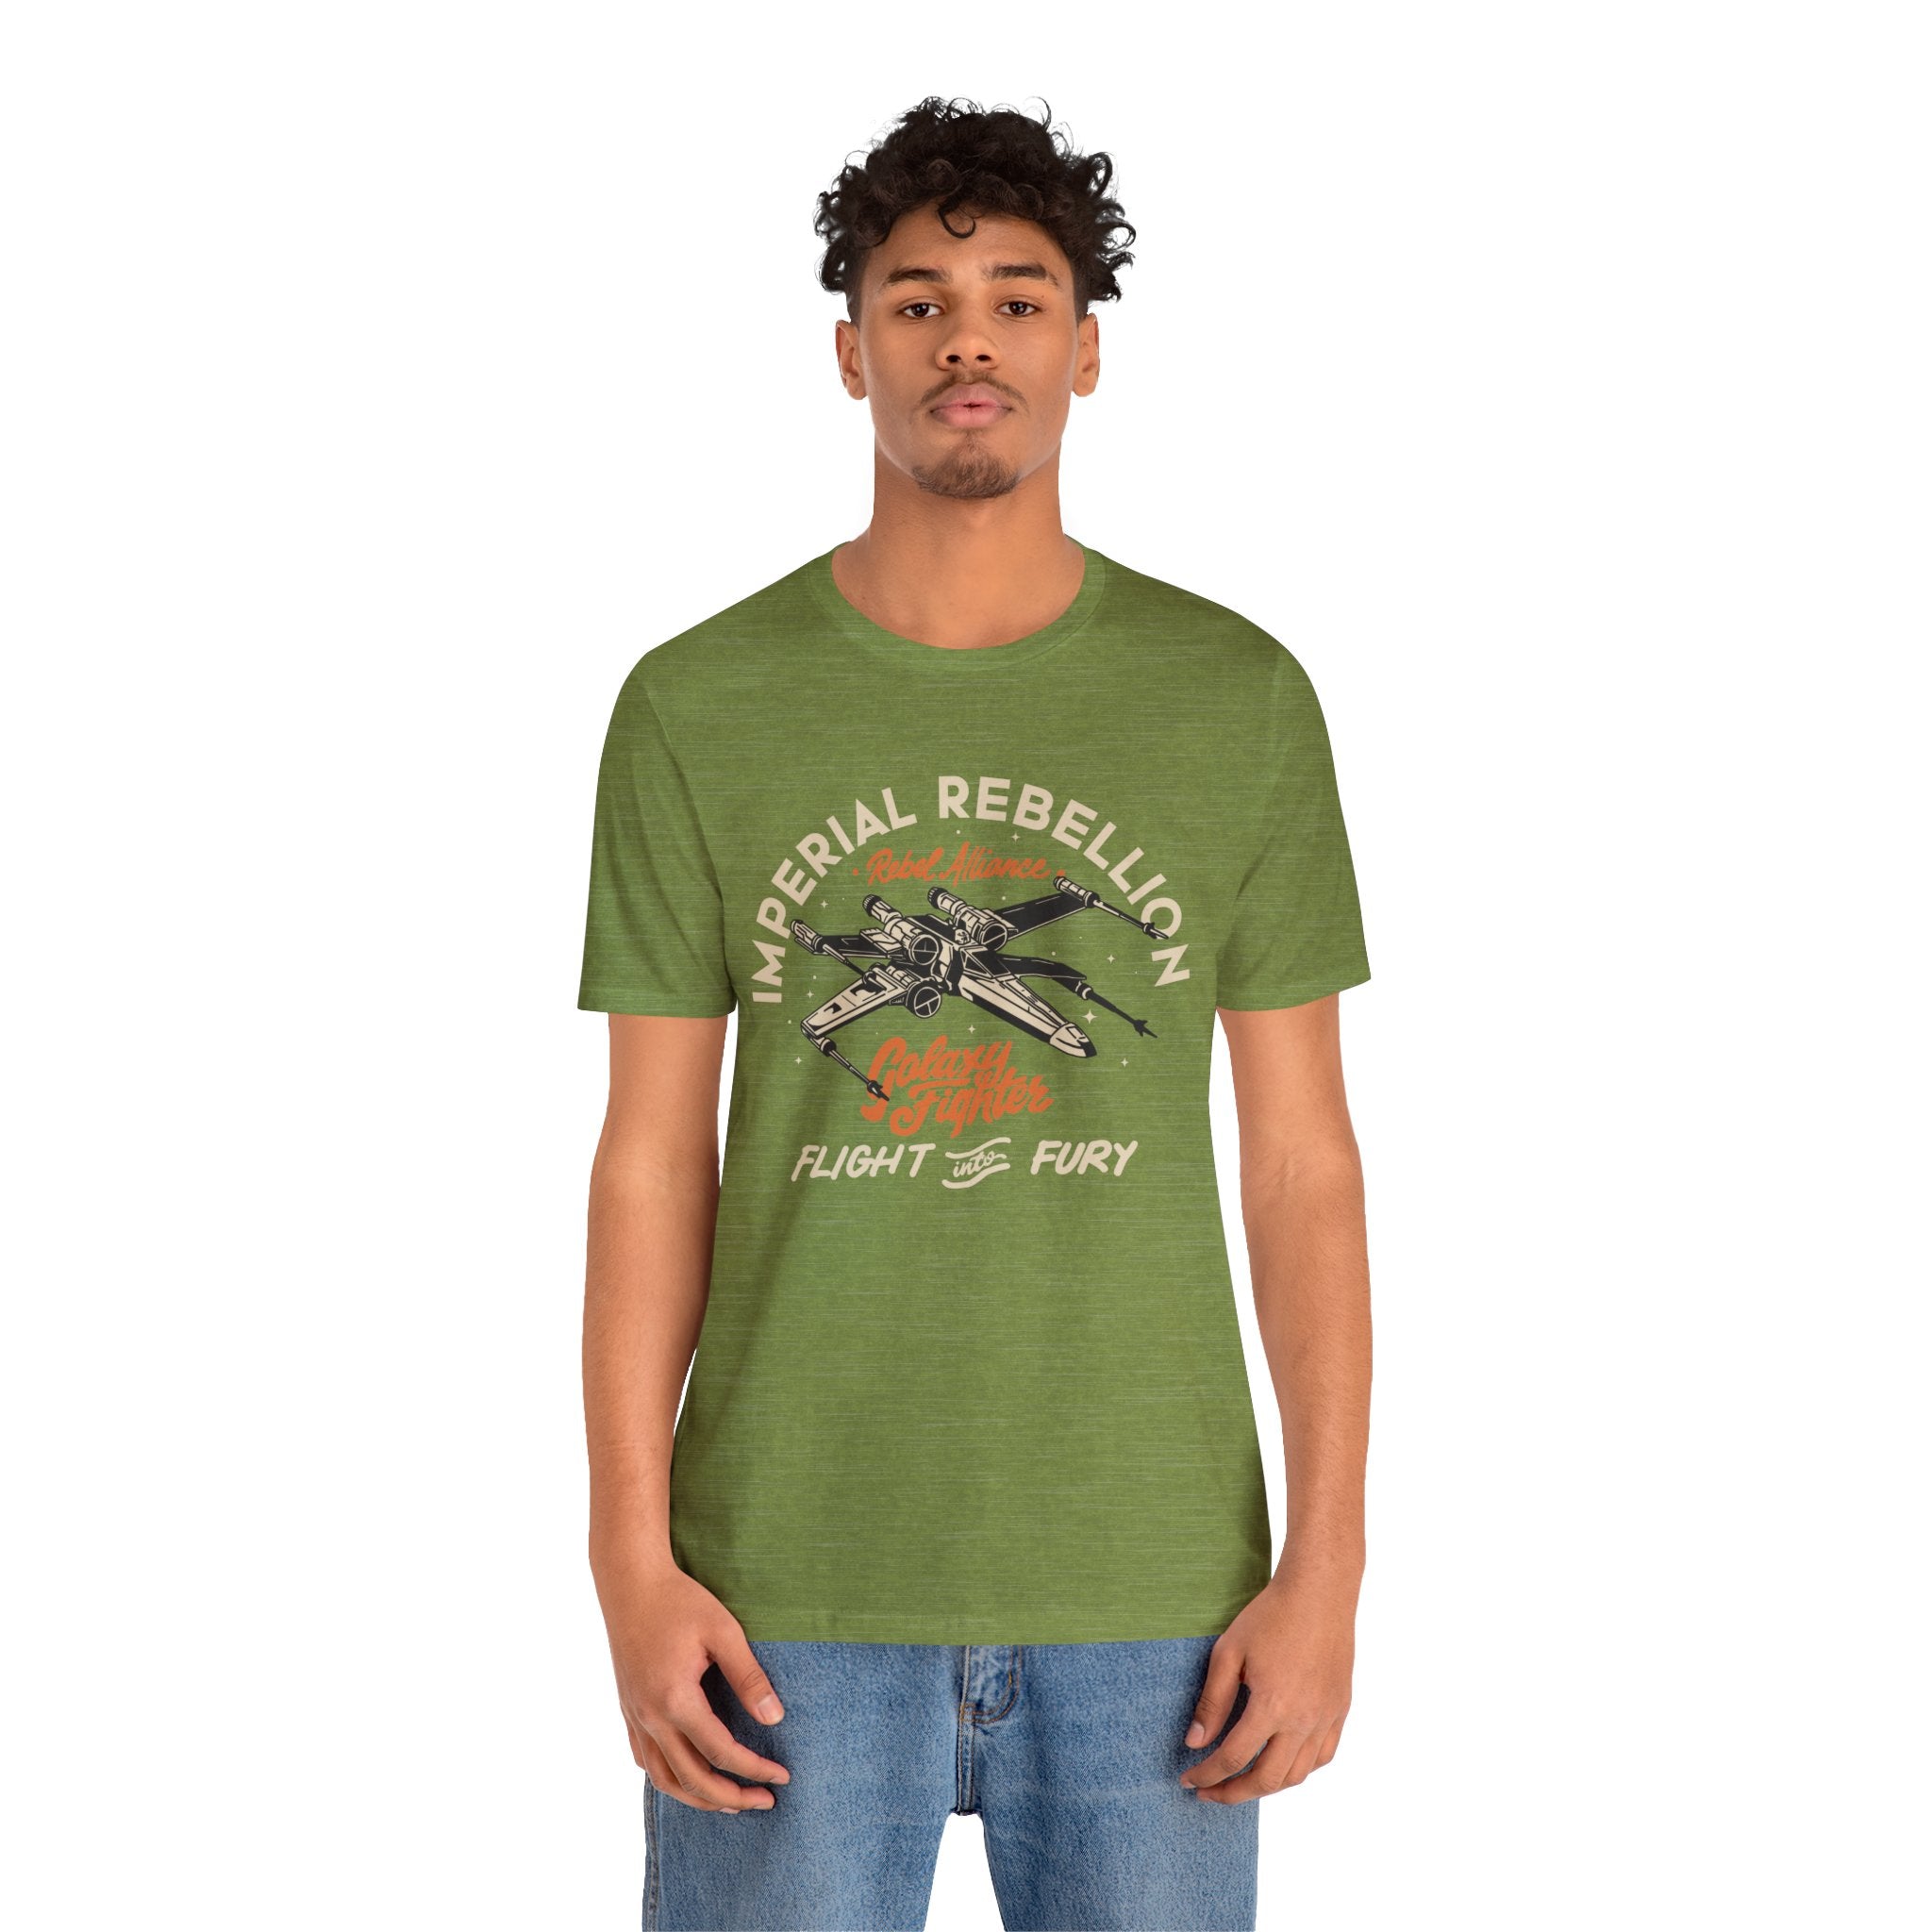 Young man in a green Skywalker T-Shirt with comfortable fit and blue jeans stands facing forward.